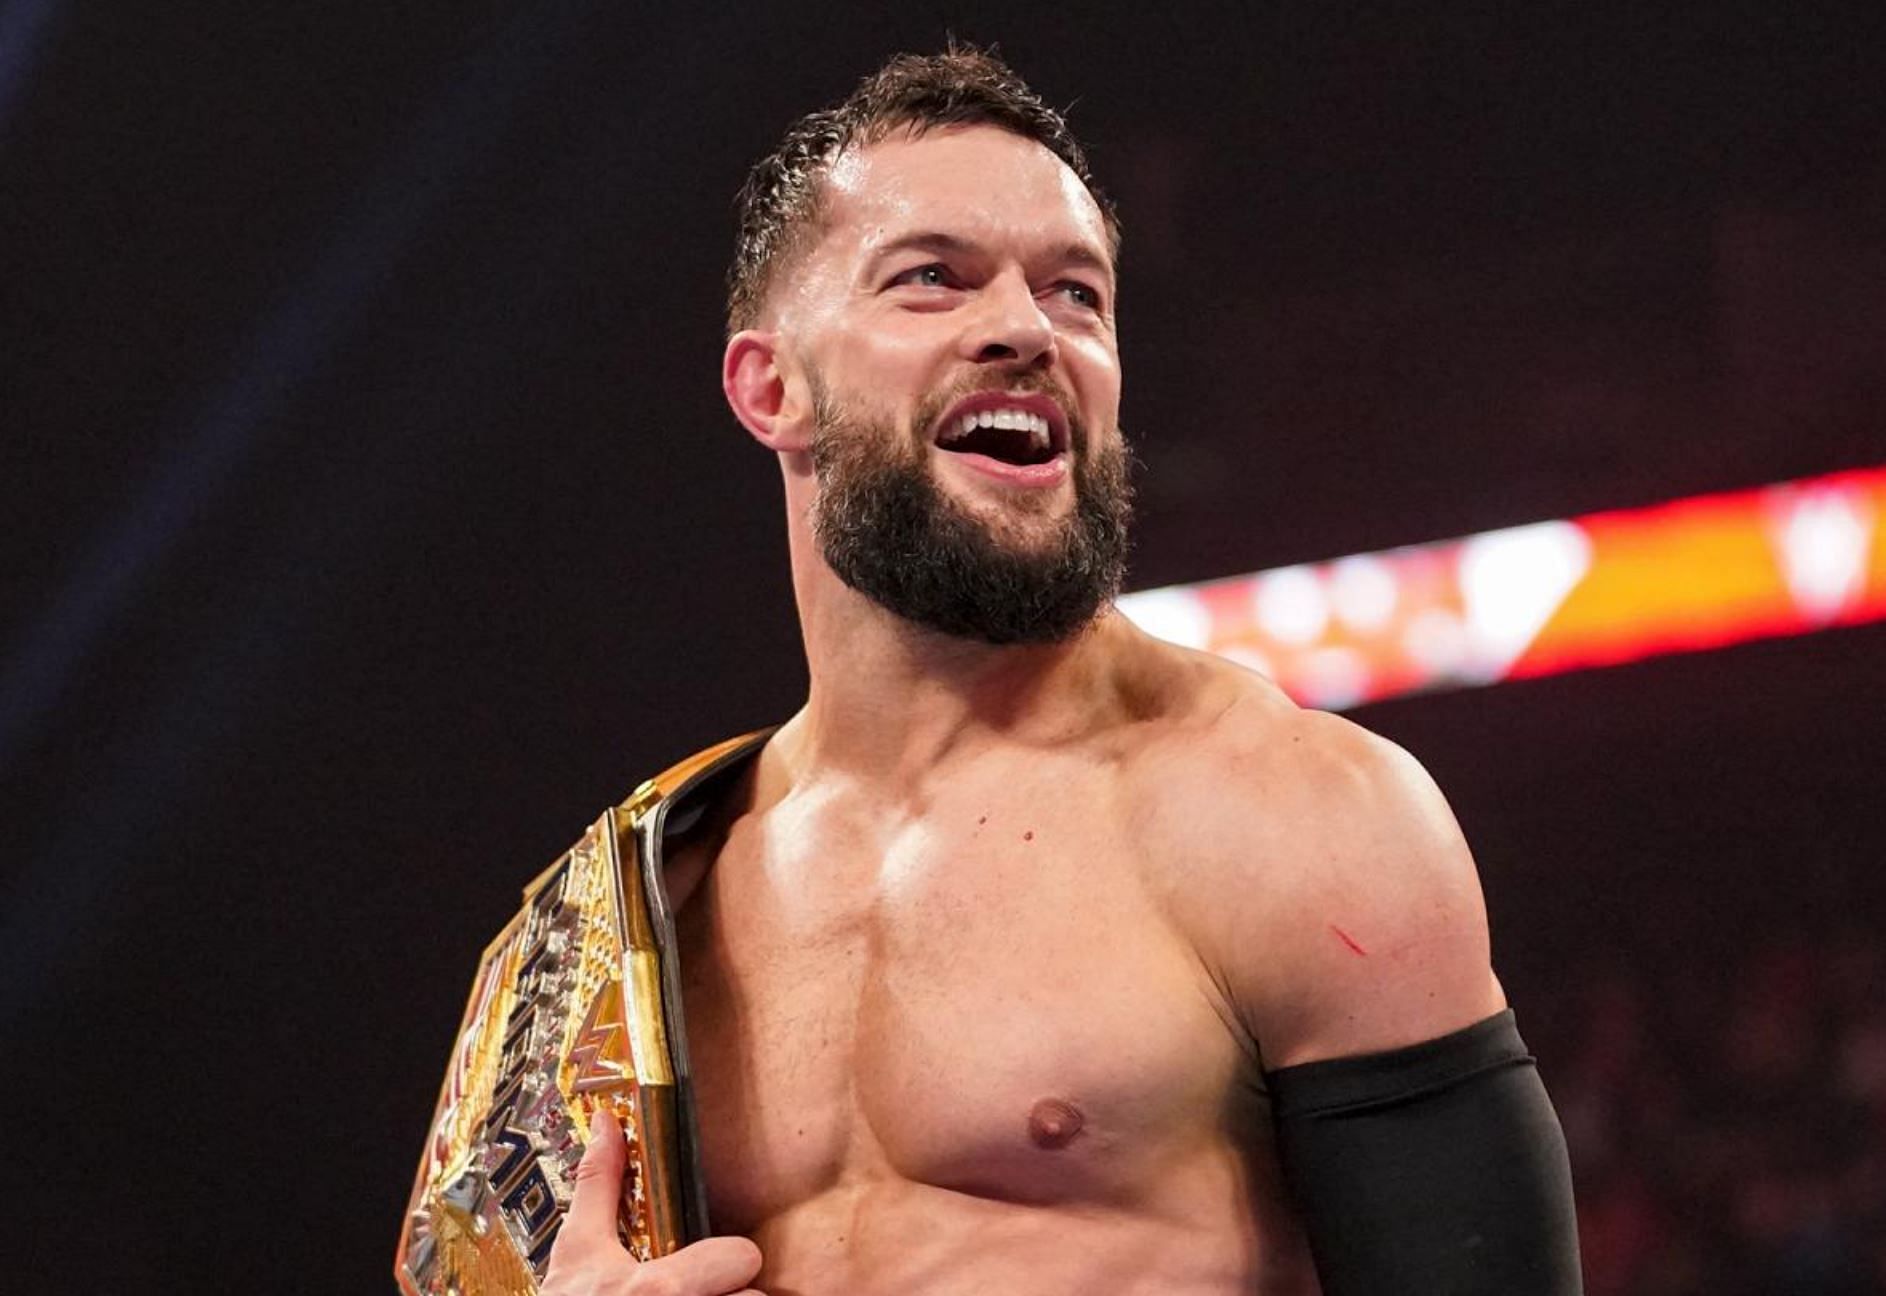 Having already won the relevant singles titles needed for the Grand Slam, all Finn Balor needs is a tag title. Considering that he already has a partner, he&#039;s already halfway there